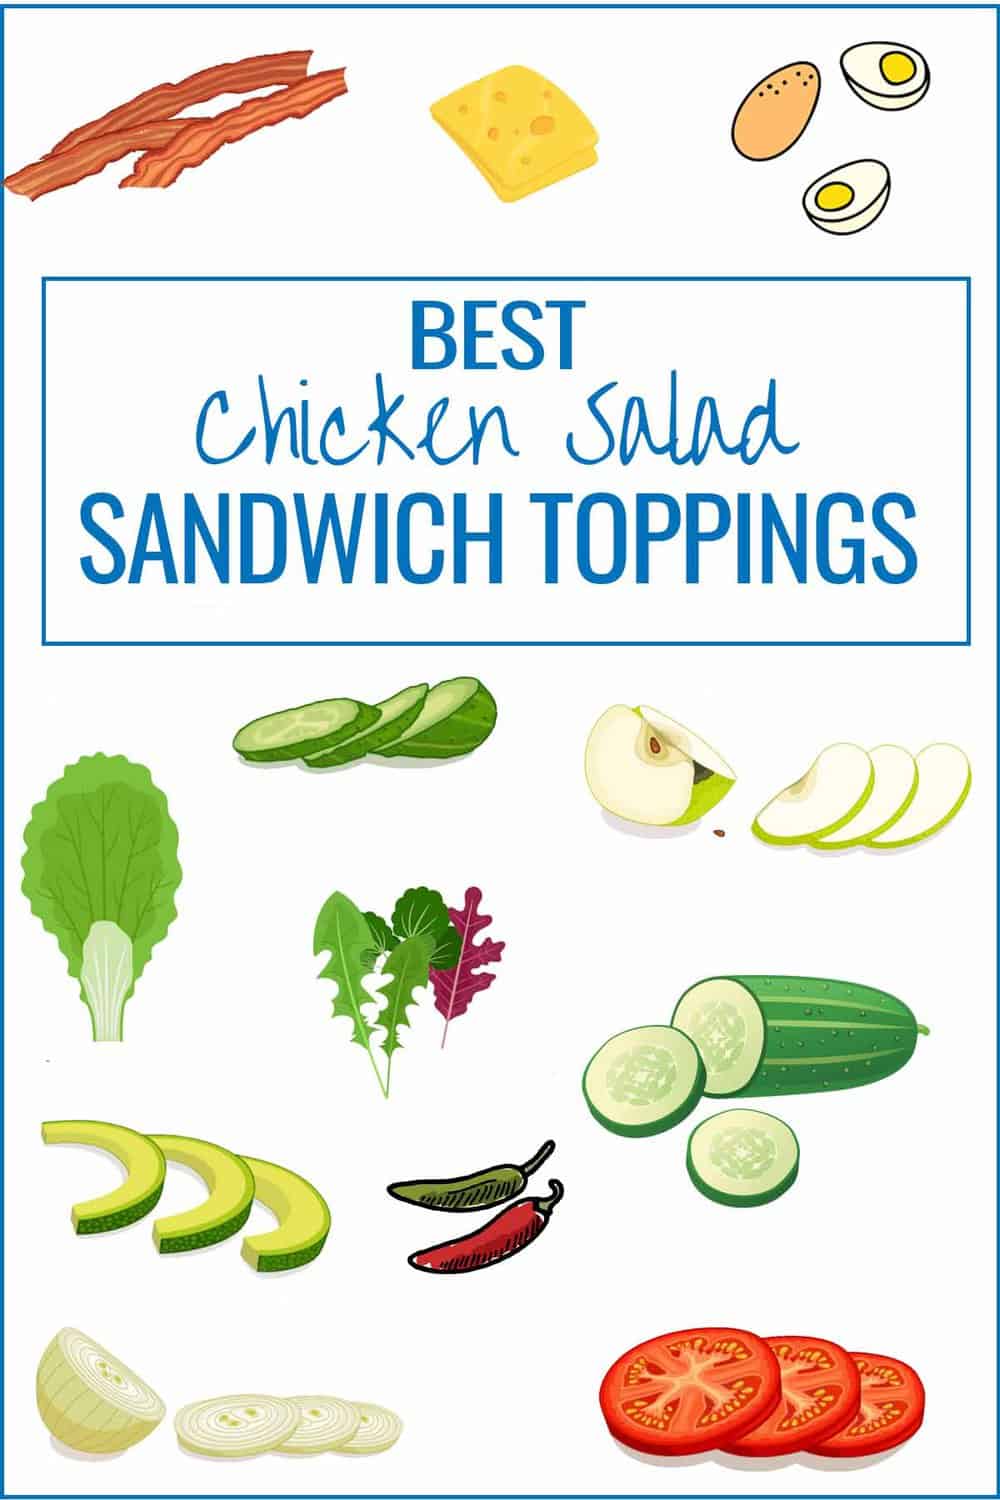 Infographic showing chicken salad sandwich toppings.